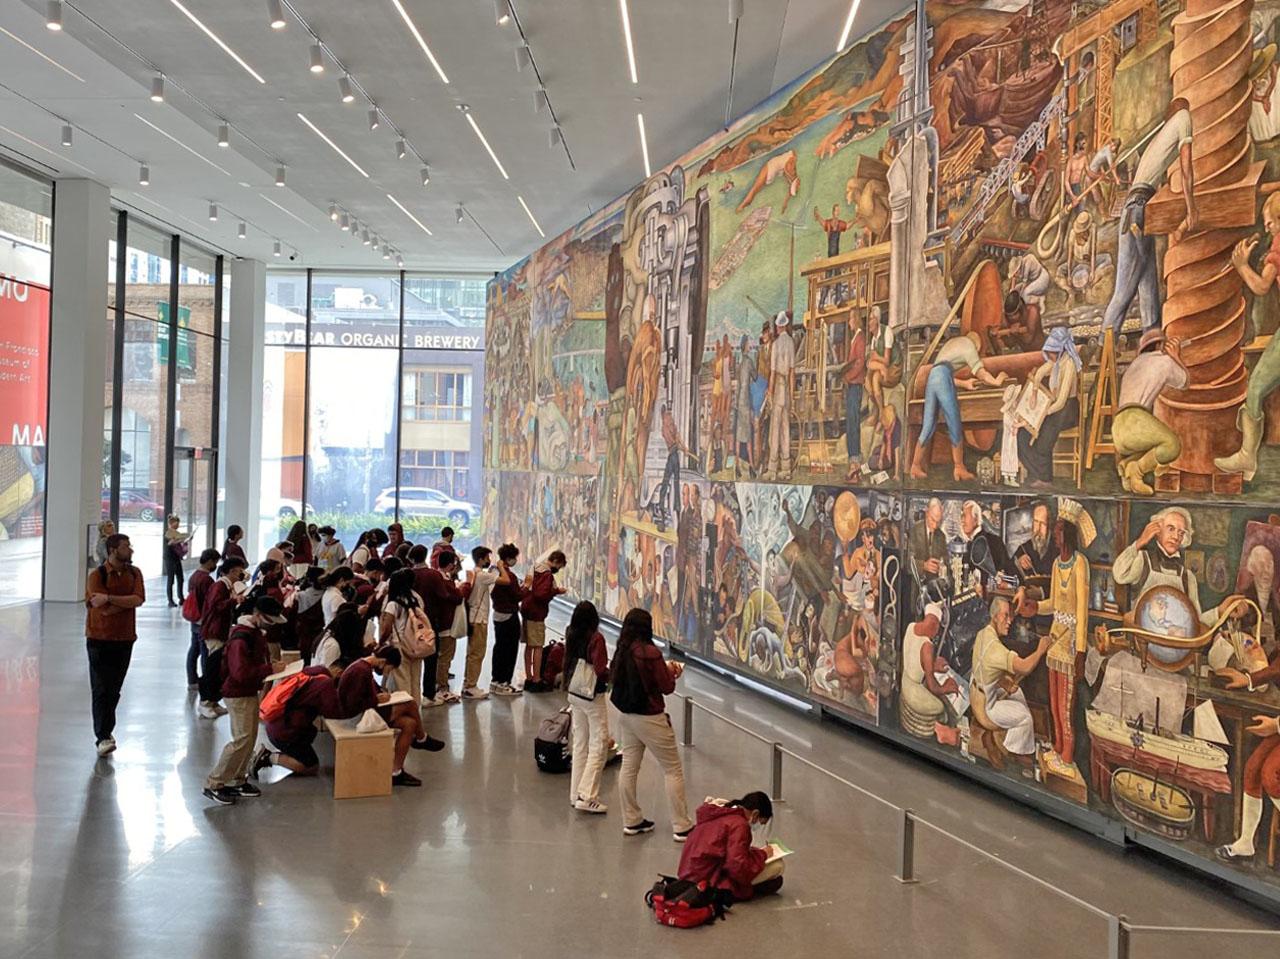 Eighth graders from Alta Loma Middle School embarked on a field trip to view the new Diego Rivera exhibition at the San Francisco Museum of Modern Art.